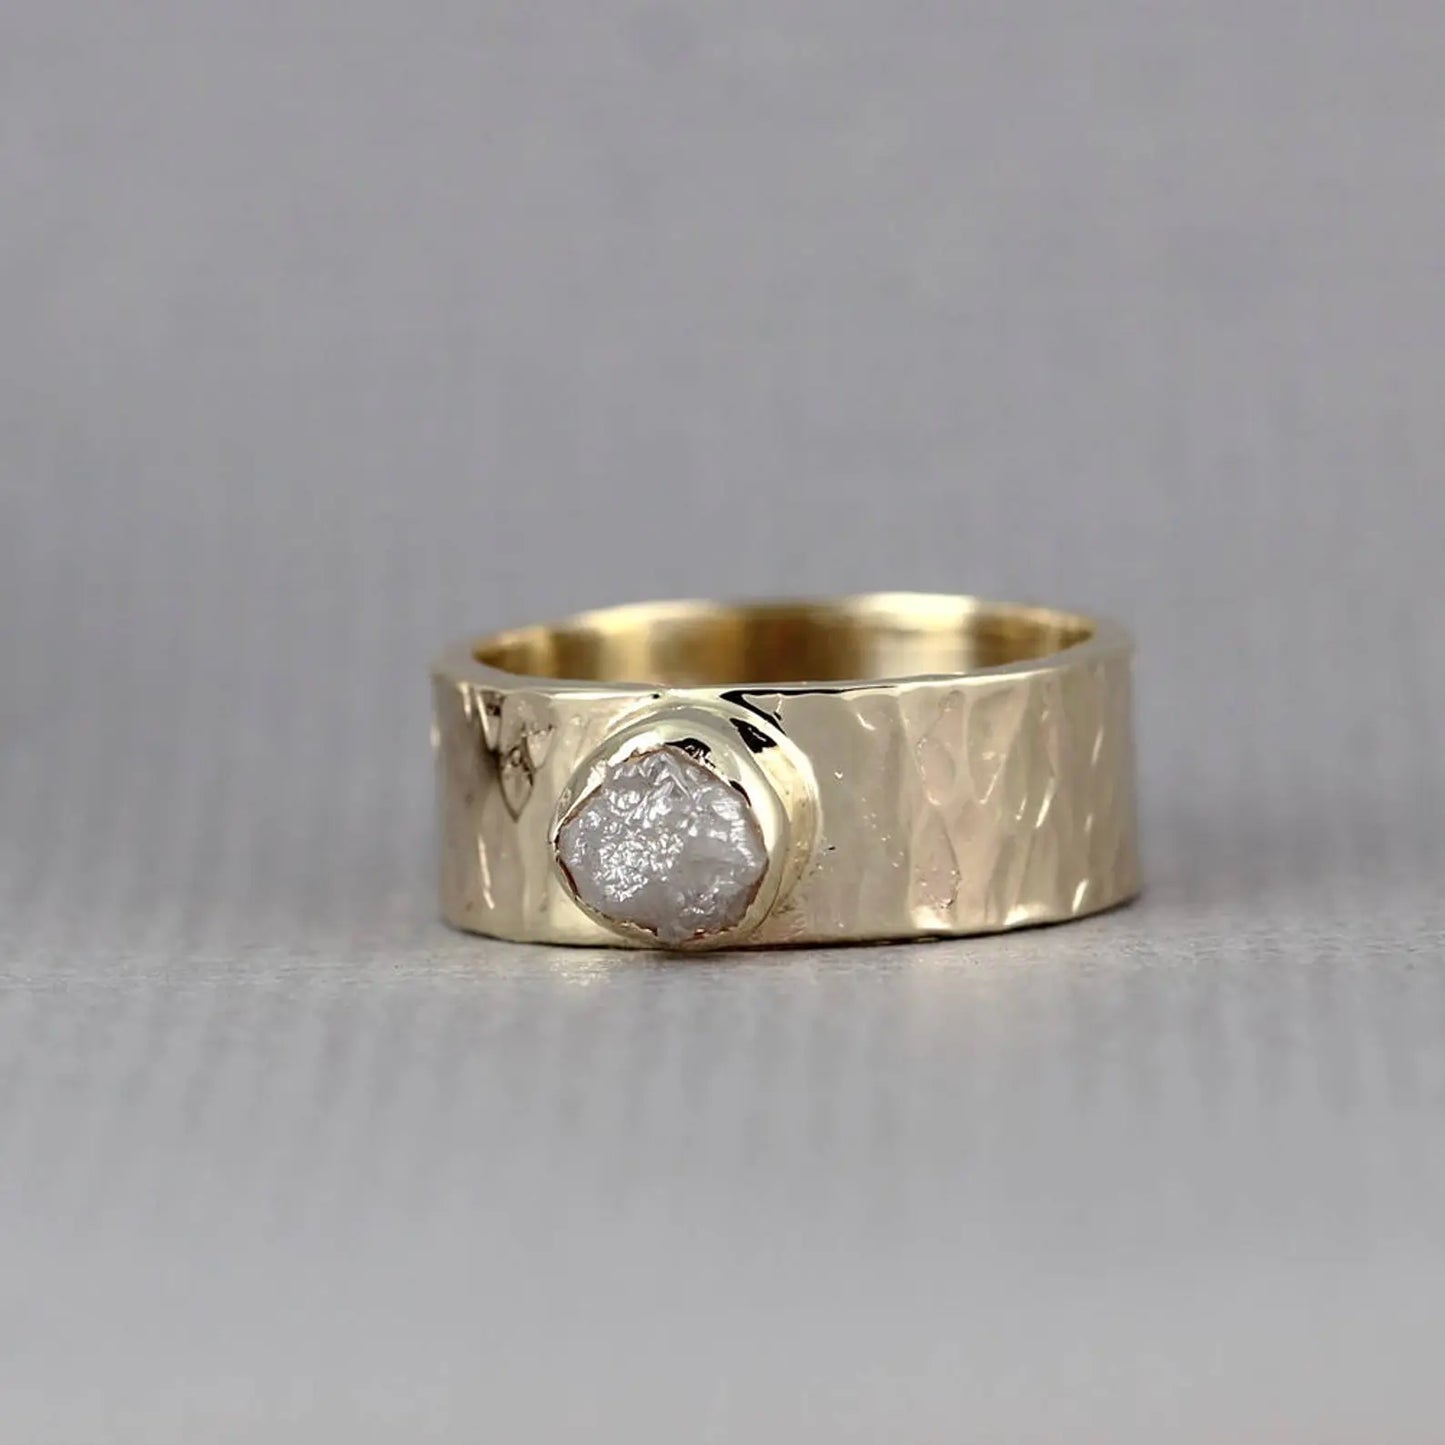 Raw Diamond Ring - 14K Yellow Gold - Rustic Hammered Style Ring